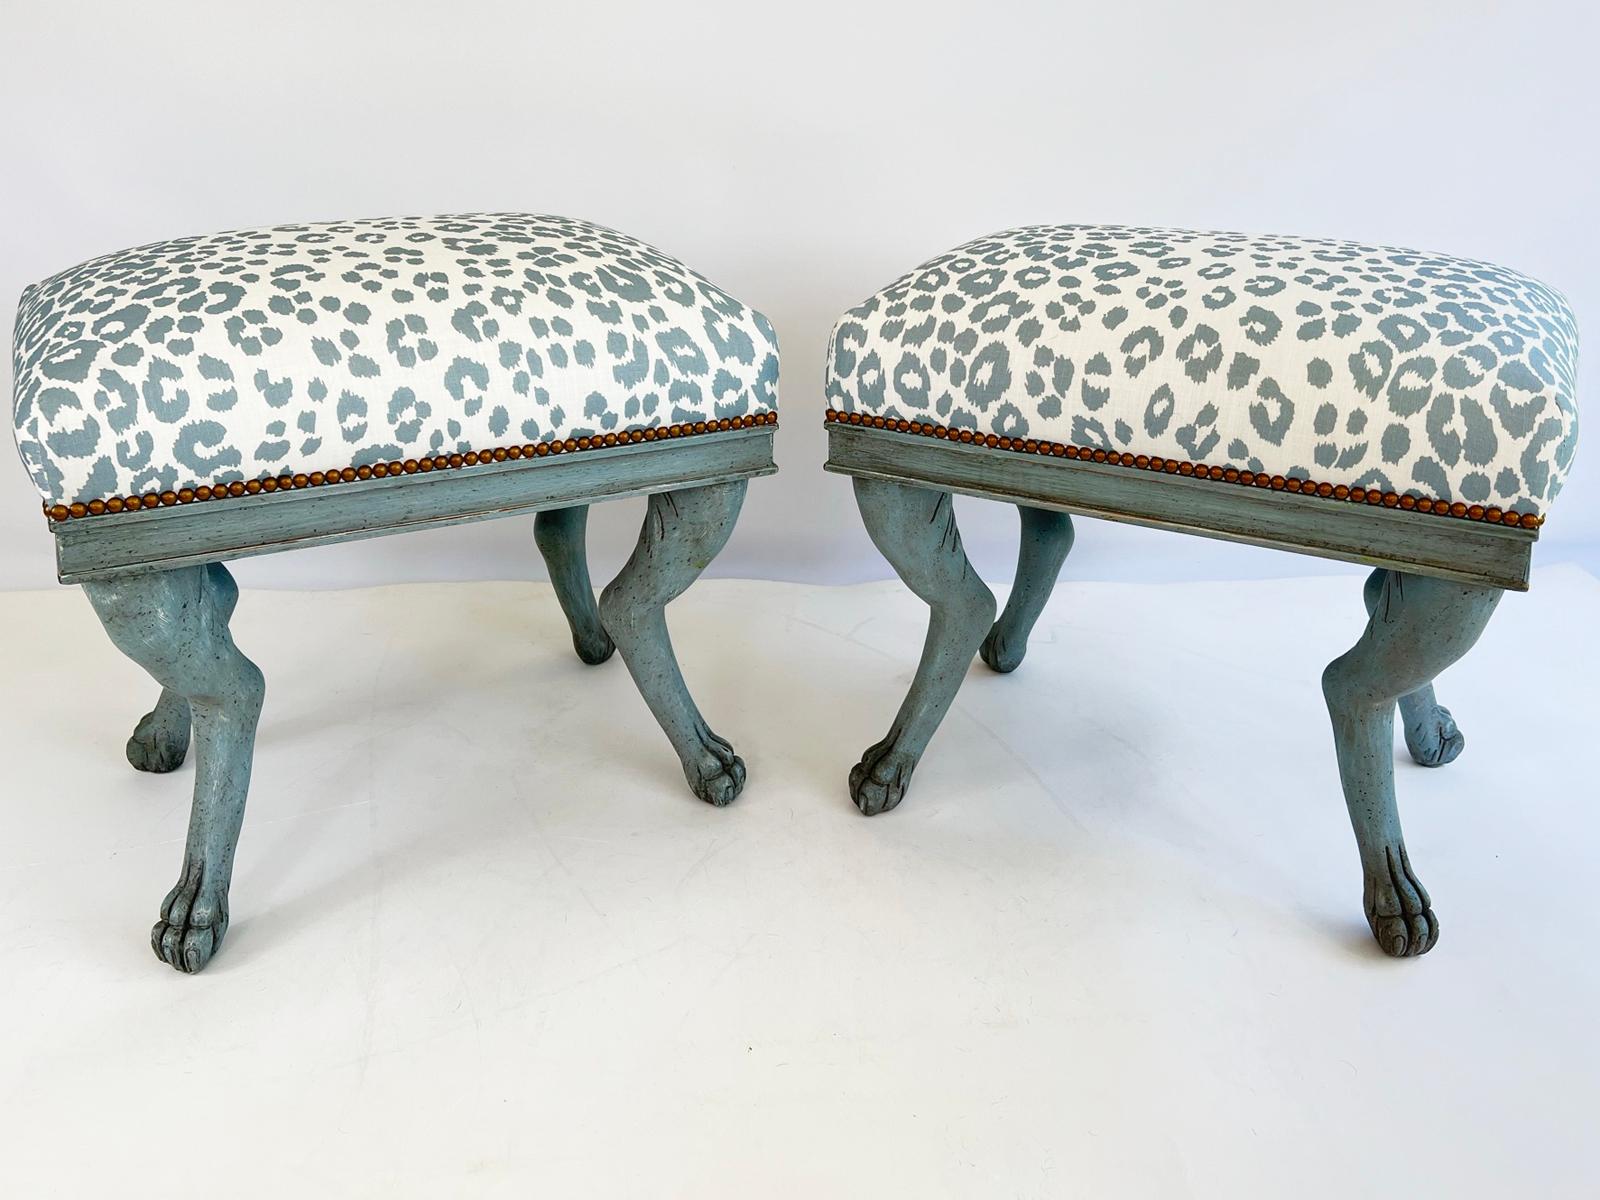 Pair of benches, having a painted finish showing natural wear. Each bench upholstered in a blue and white leopard print with nailheads, on a fielded frame. Four legs are carved into a hock-leg animal form, ending in paw feet.

Stock ID: D1635.